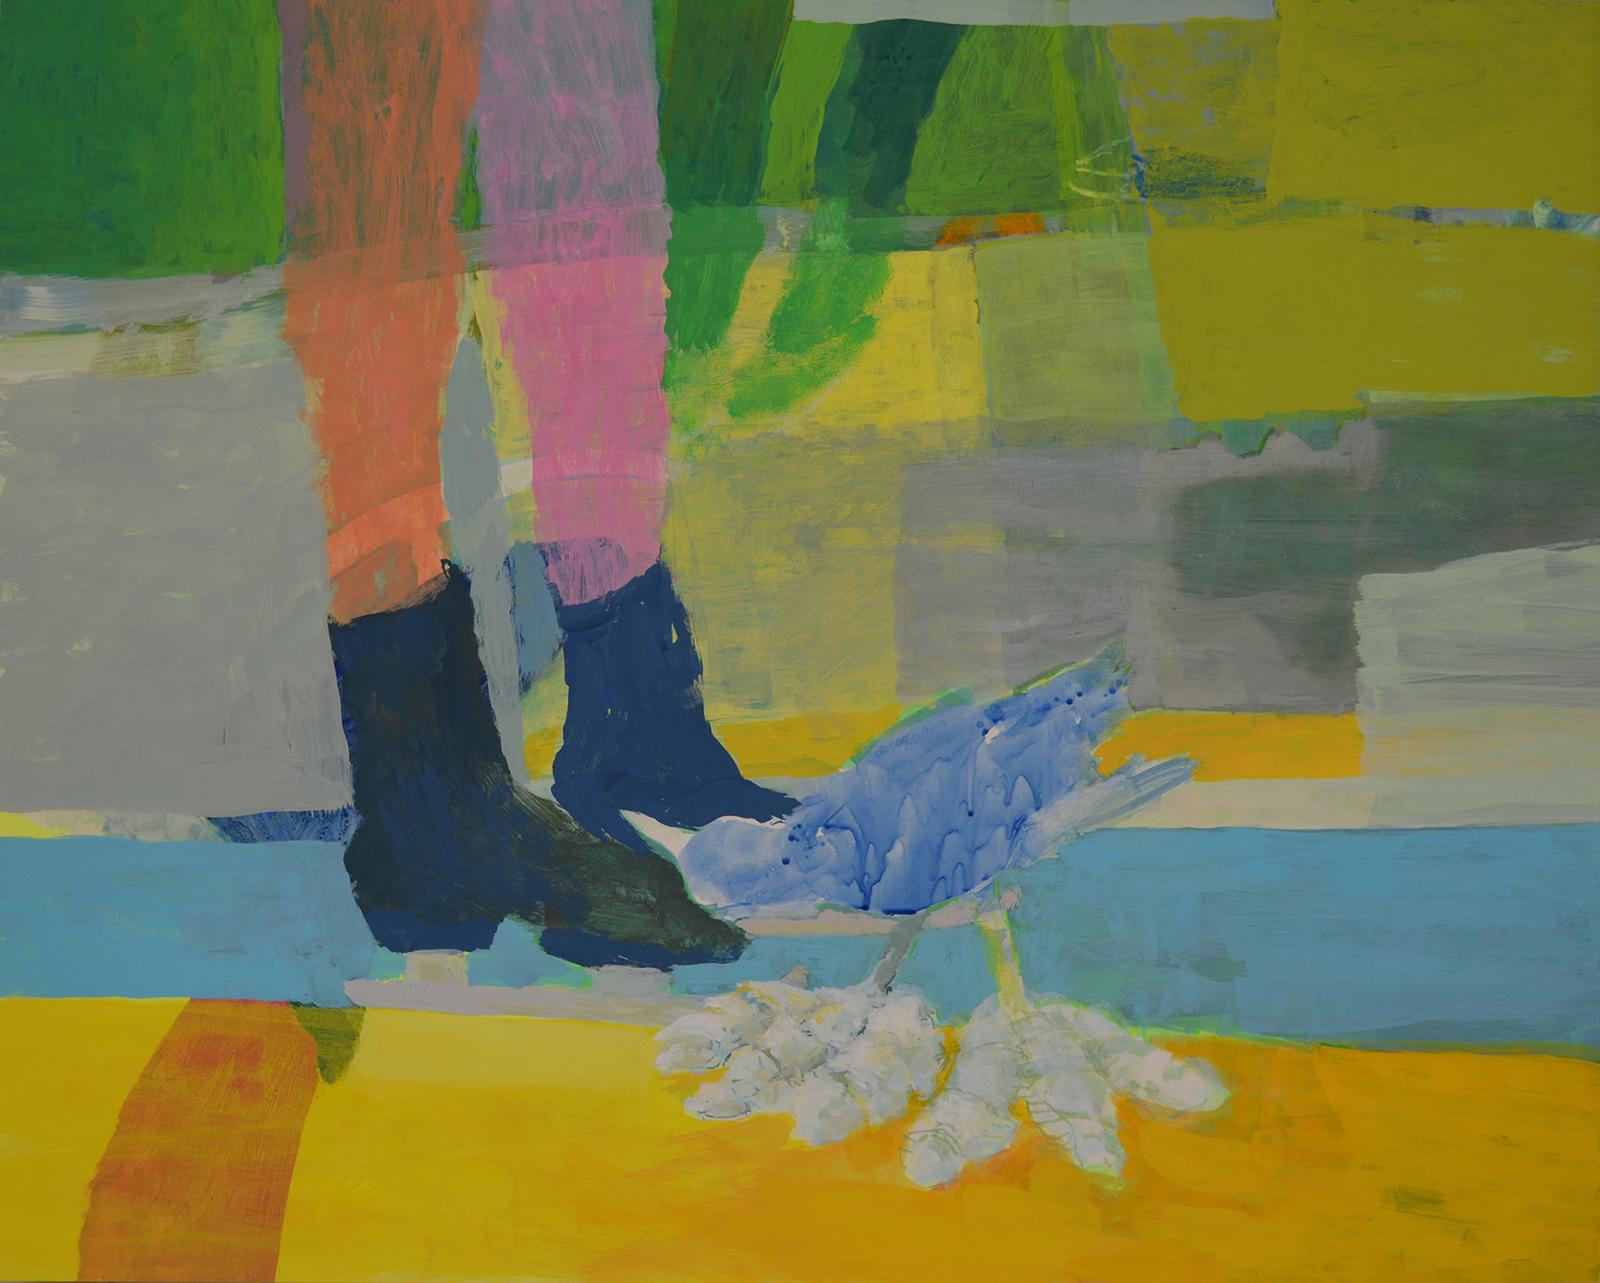 this shows an encounter between a blue water bird and a human on ice skates on a ground of quilted shapes of yellows, greens, greys and blue. the human figure is shown up to below the hip. there is an echo in the back of another sketchy figure just hinted at.